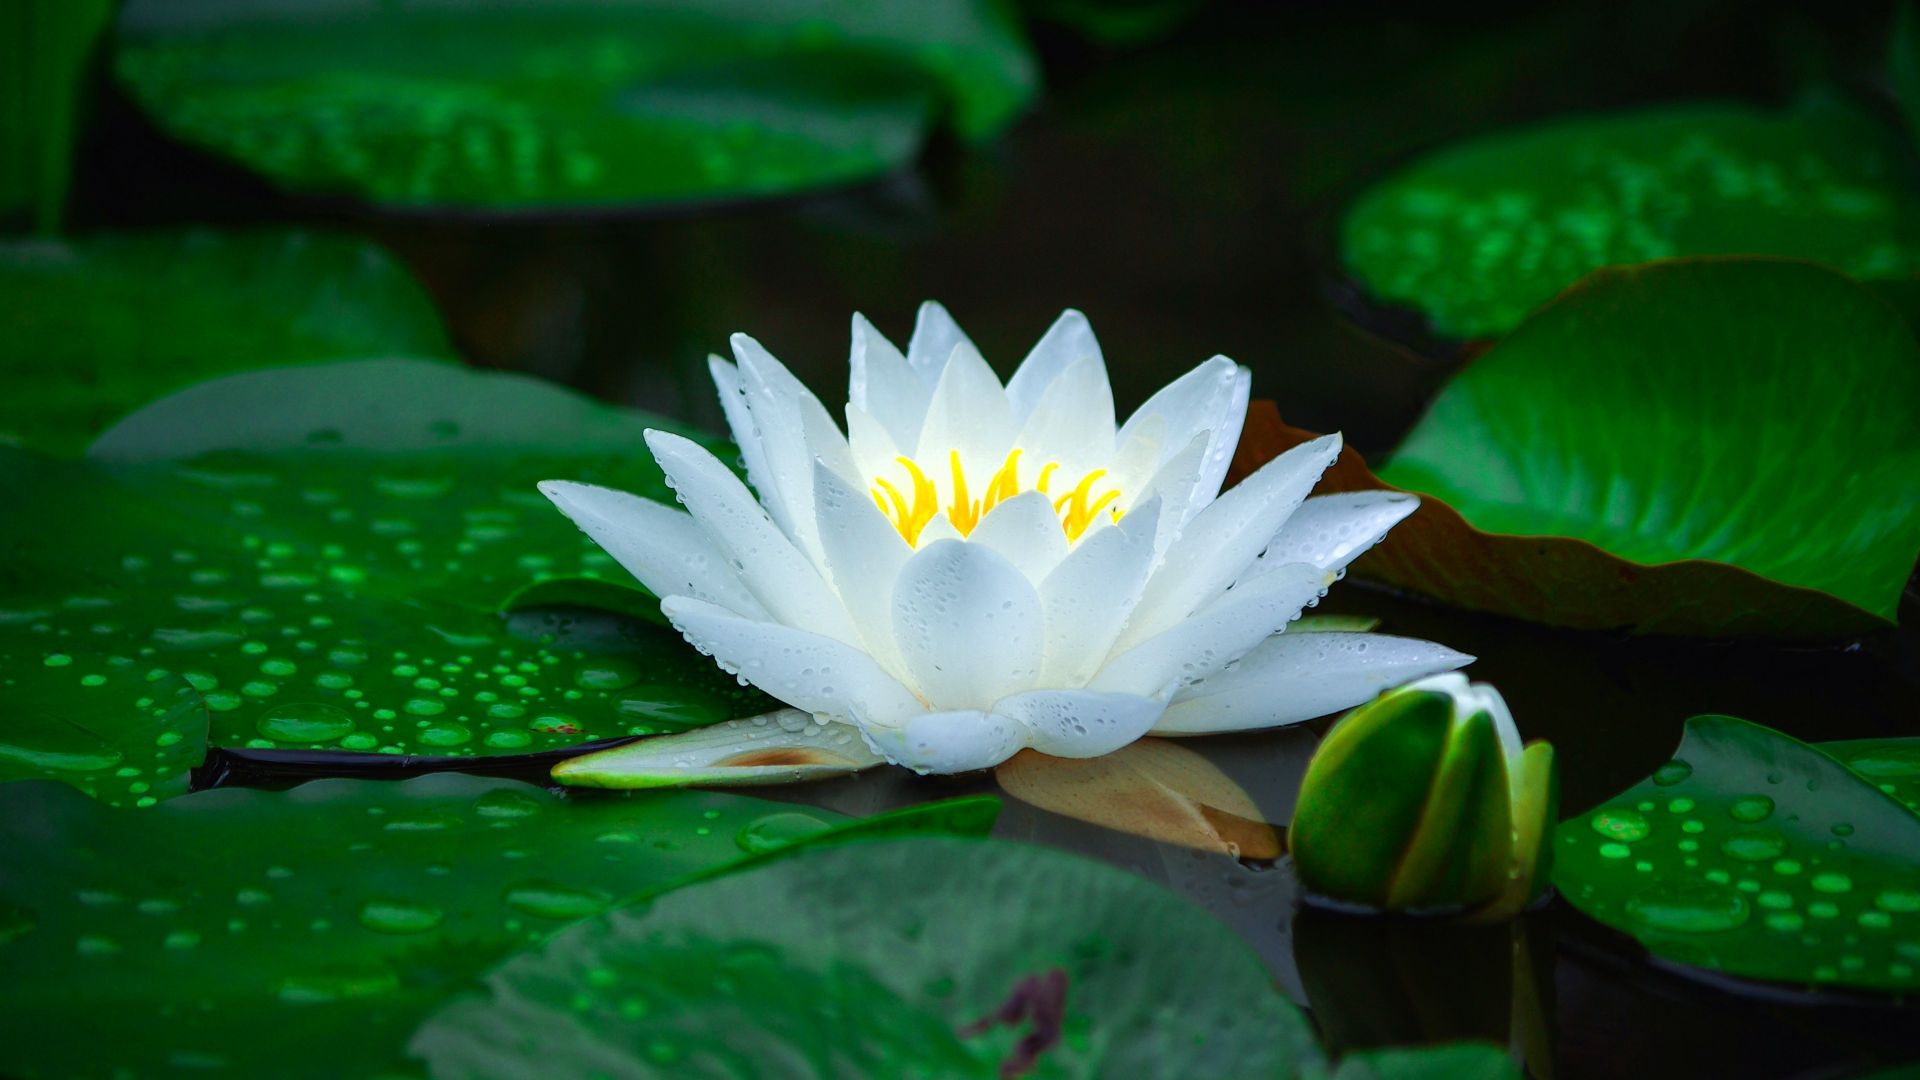 Bloom, white, water lily, leaf, lake, flower wallpaper, HD image, picture, background, a81be1